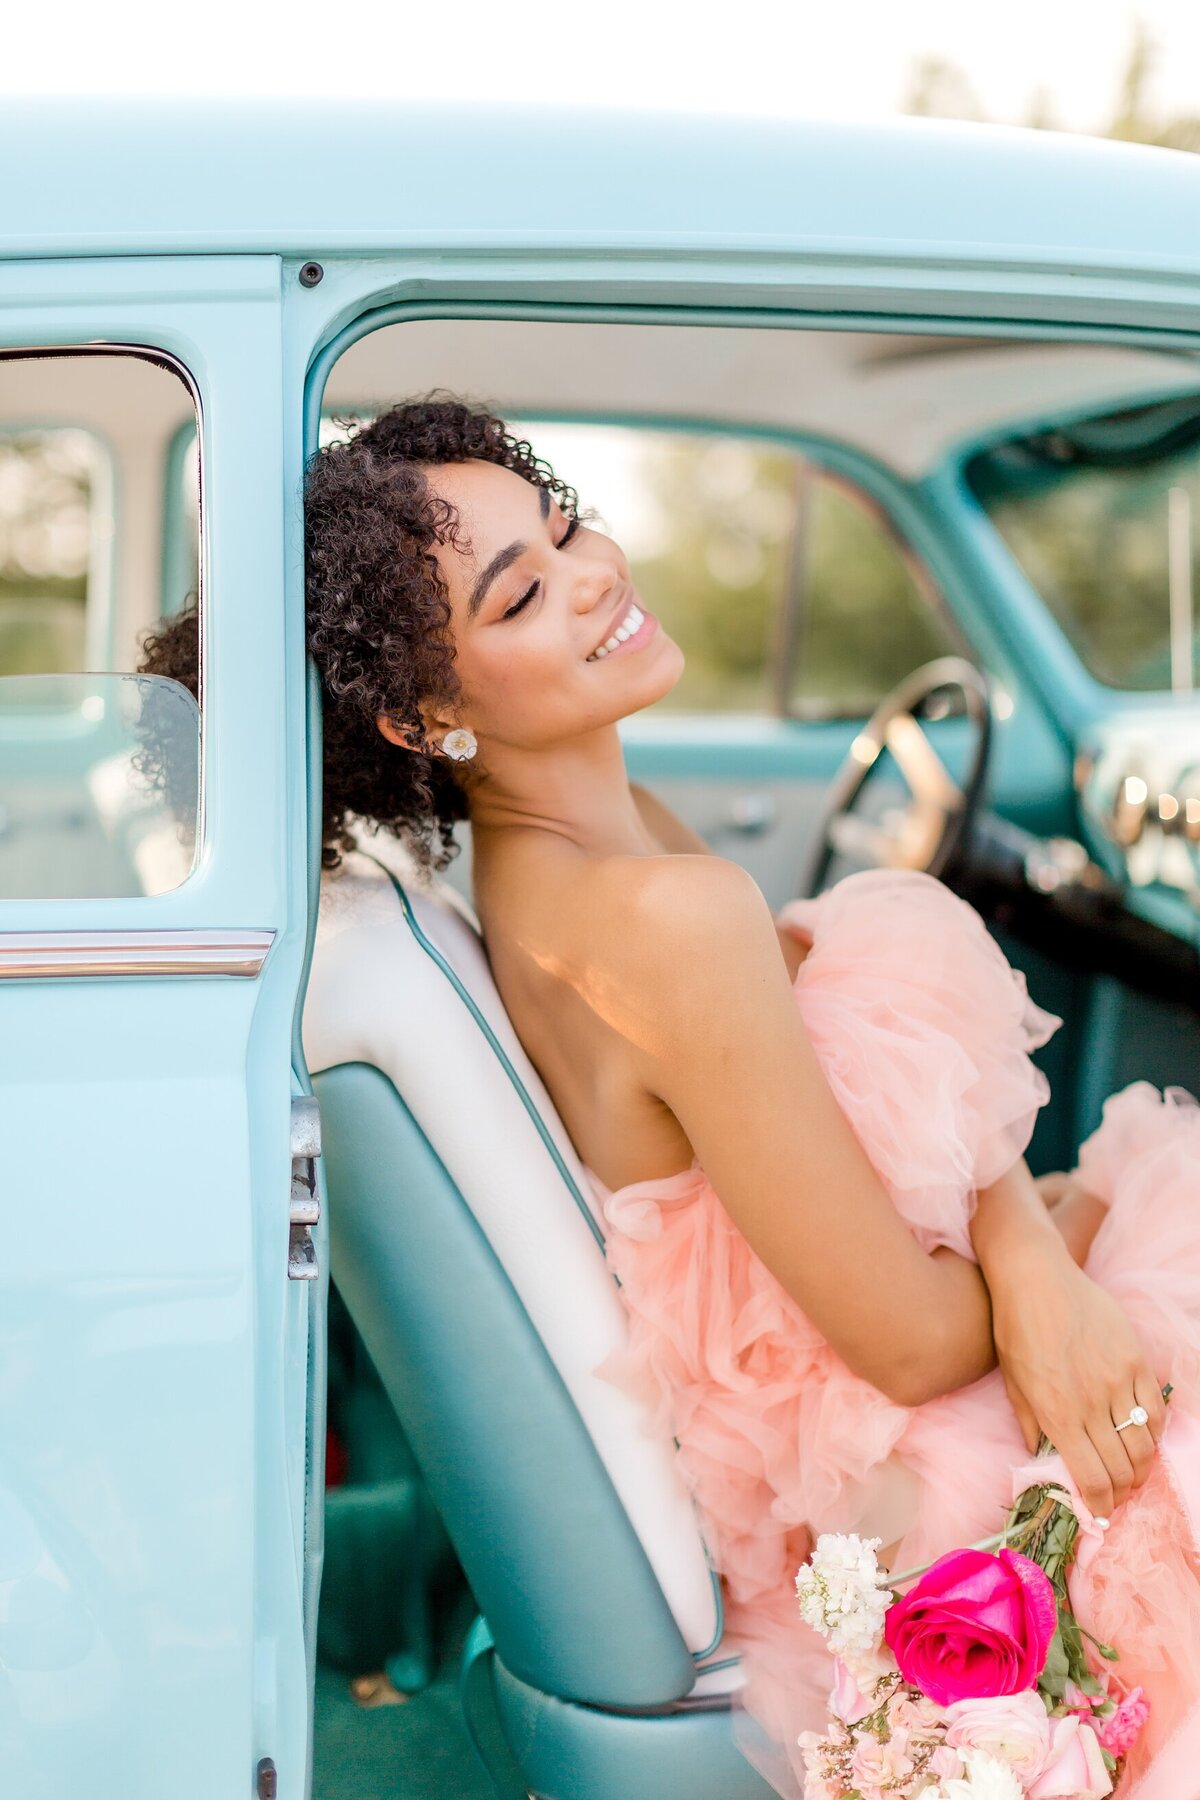 Woman in pink dress sits in the passenger seat of classic car while holding flowers.